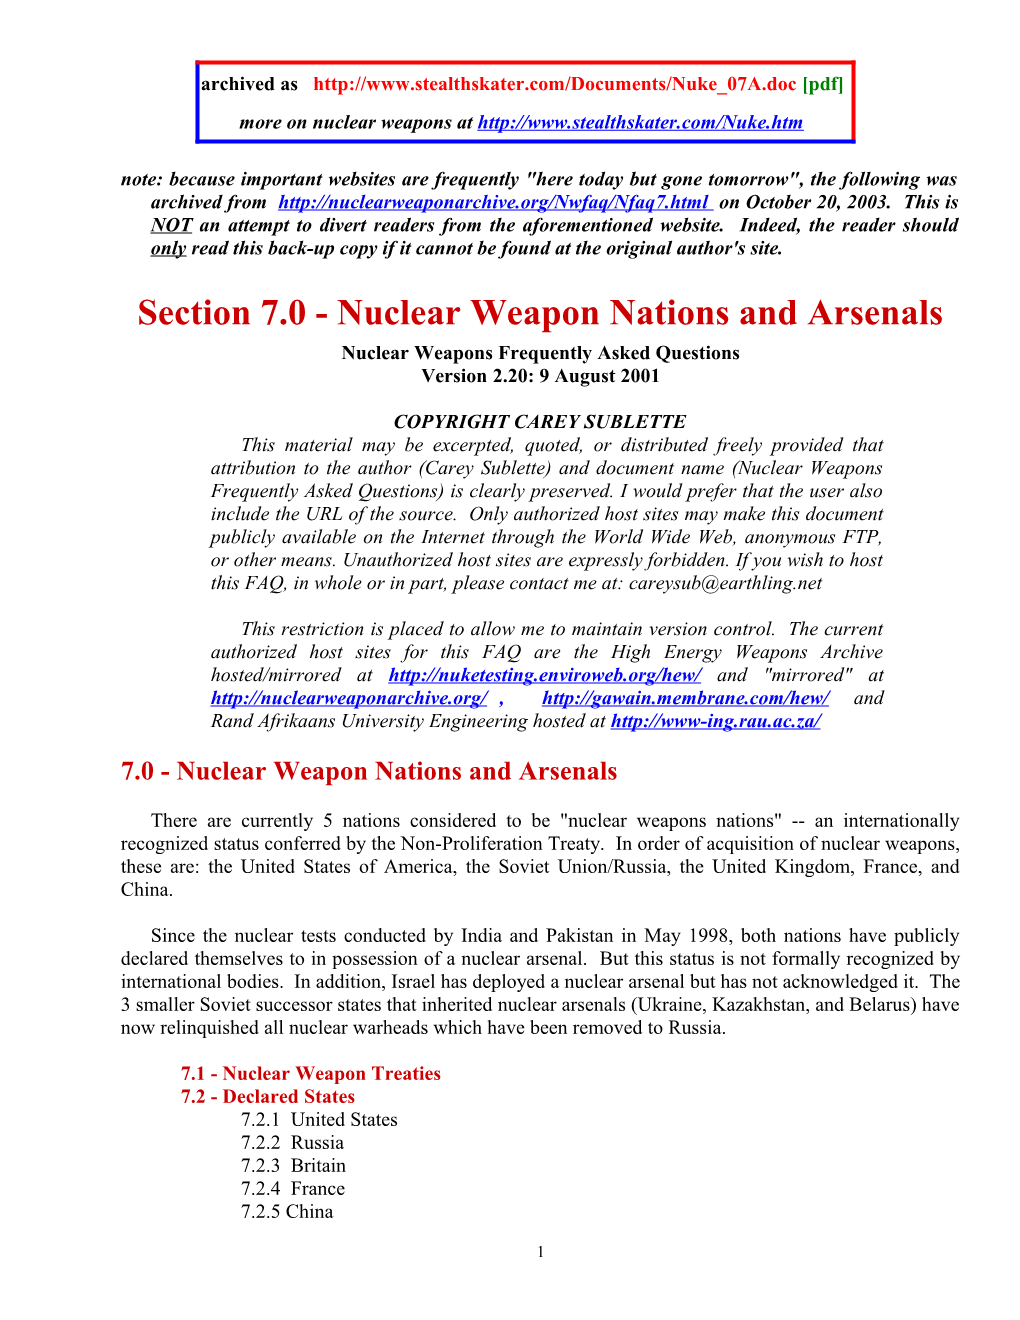 Section 7.0 - Nuclear Weapon Nations and Arsenals